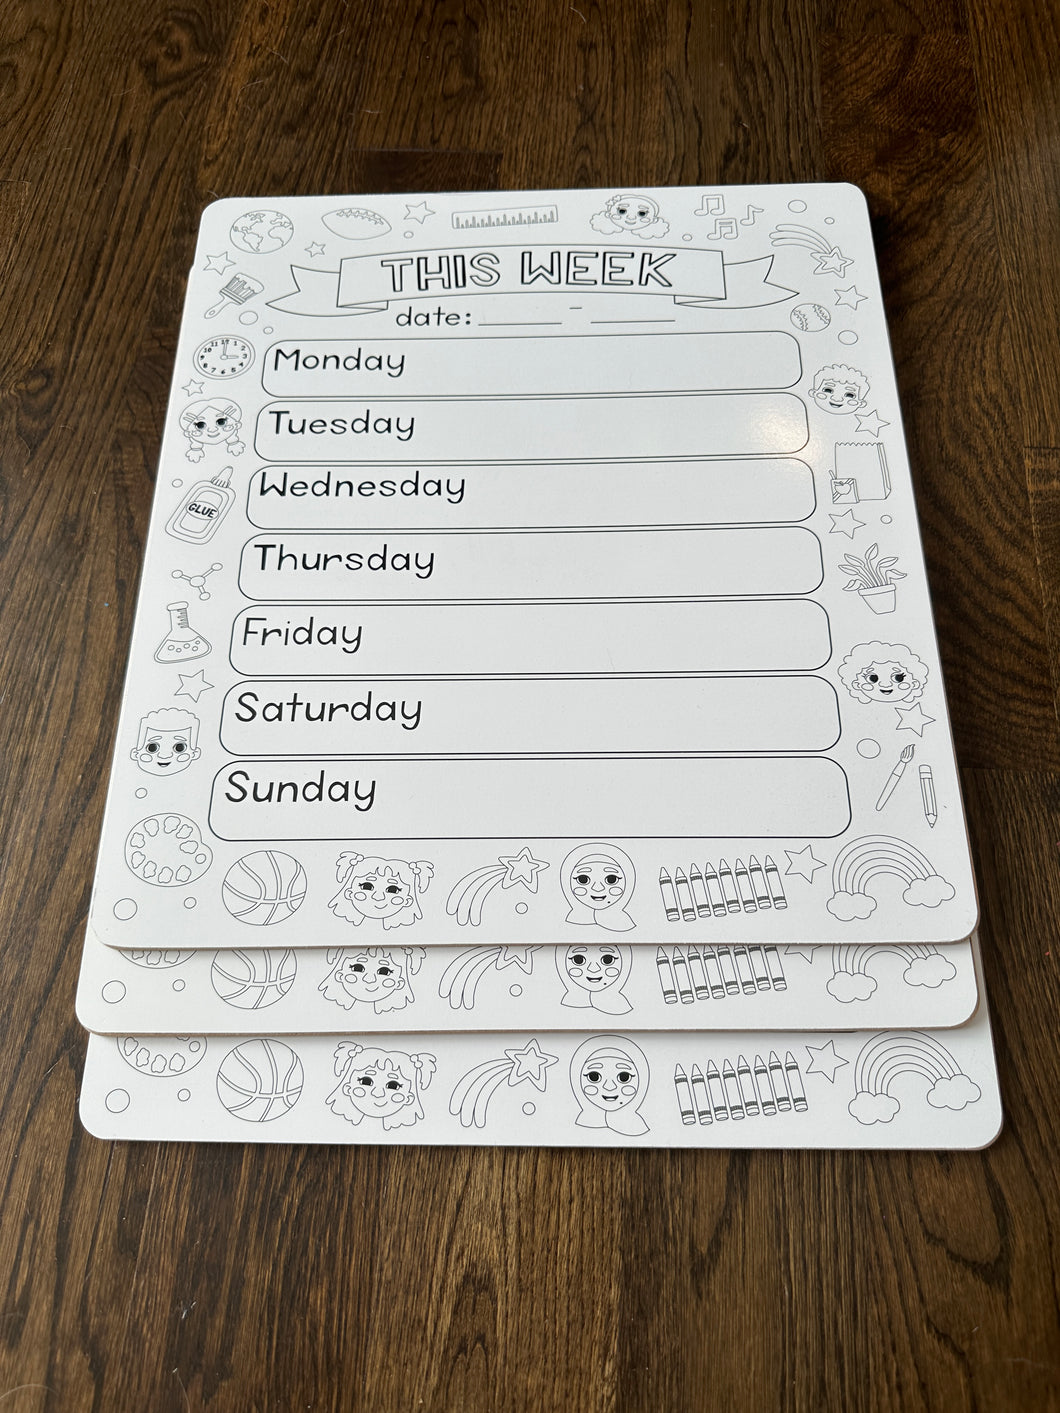 Michael’s This Week Dry Erase Boards